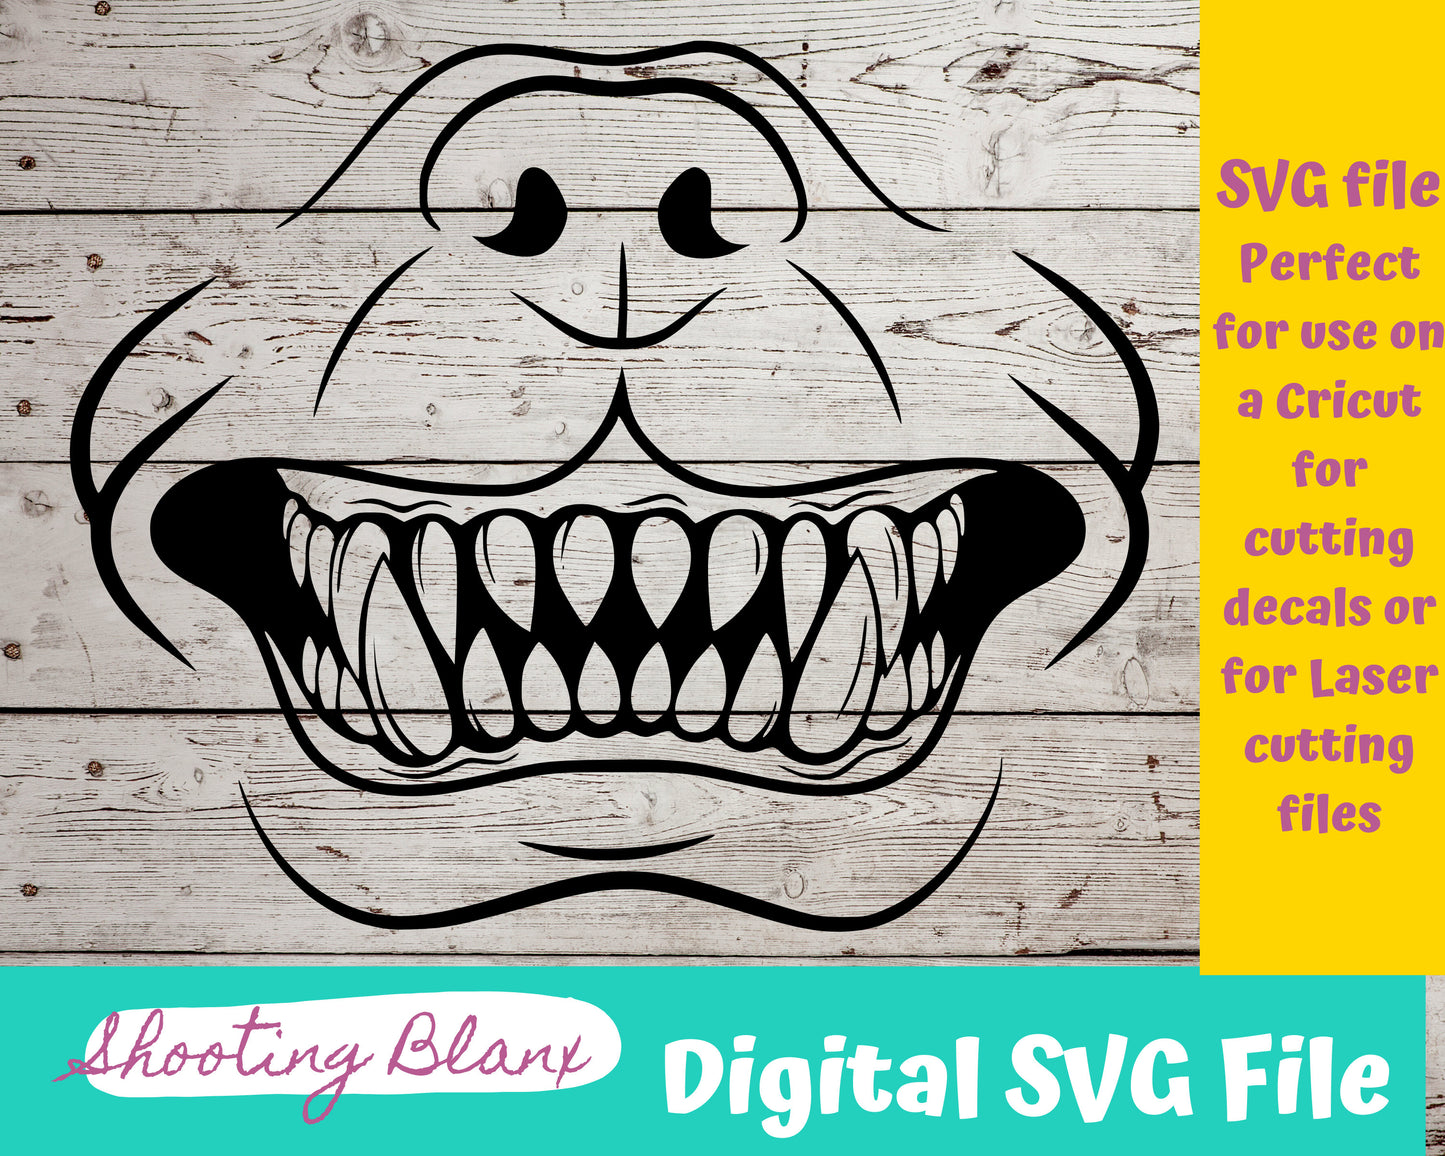 Pitbull Dog Mouth SVG file perfect for Cricut, Cameo, or Silhouette also for laser engraving Glowforge, half face, mask, sublimation